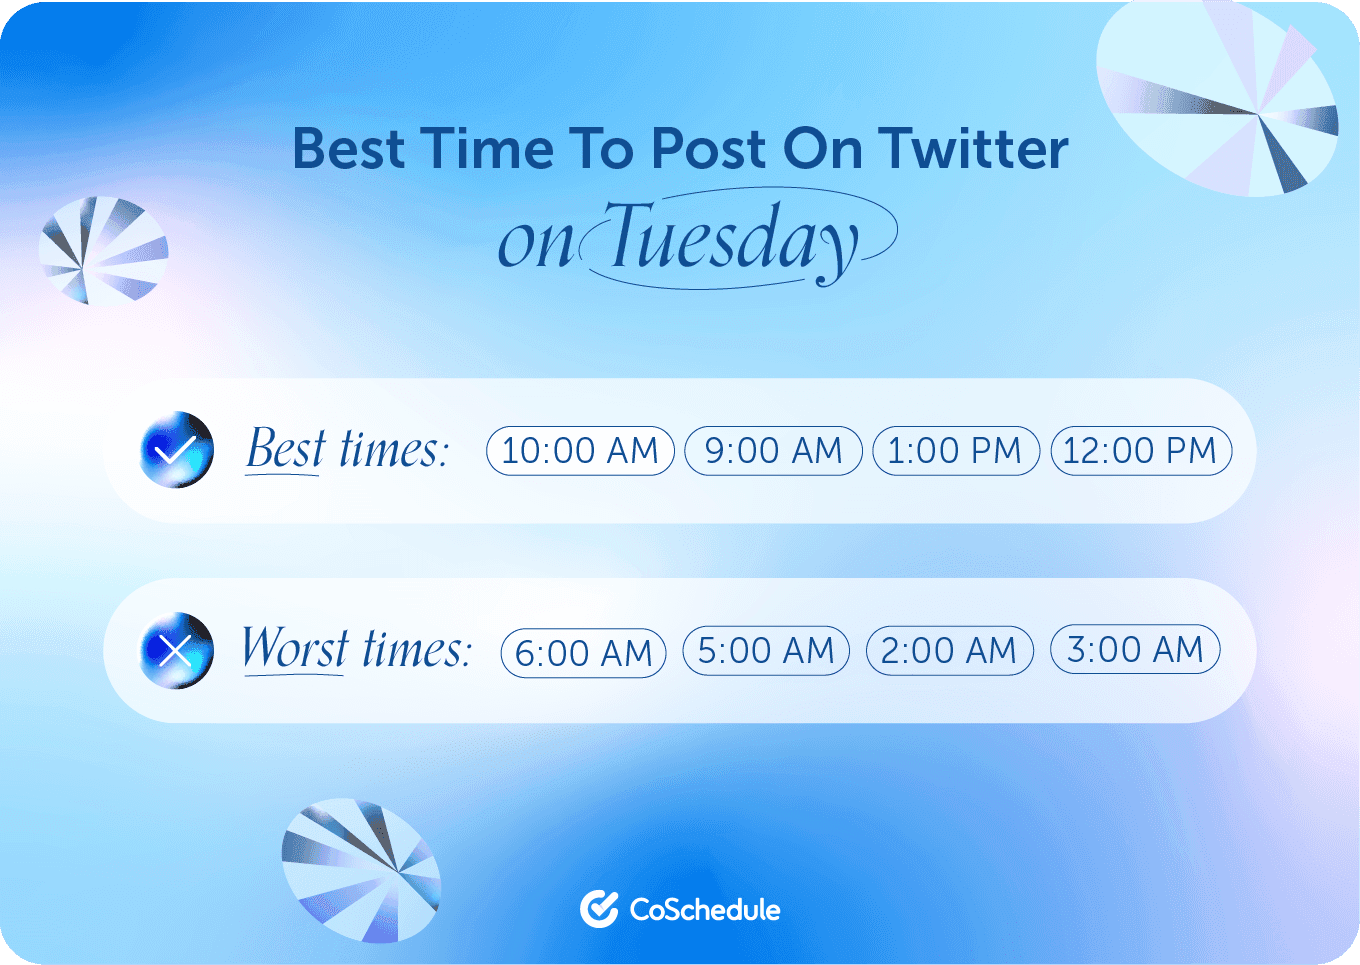 Coschedule graphic on the best times to post to Twitter on Tuesday